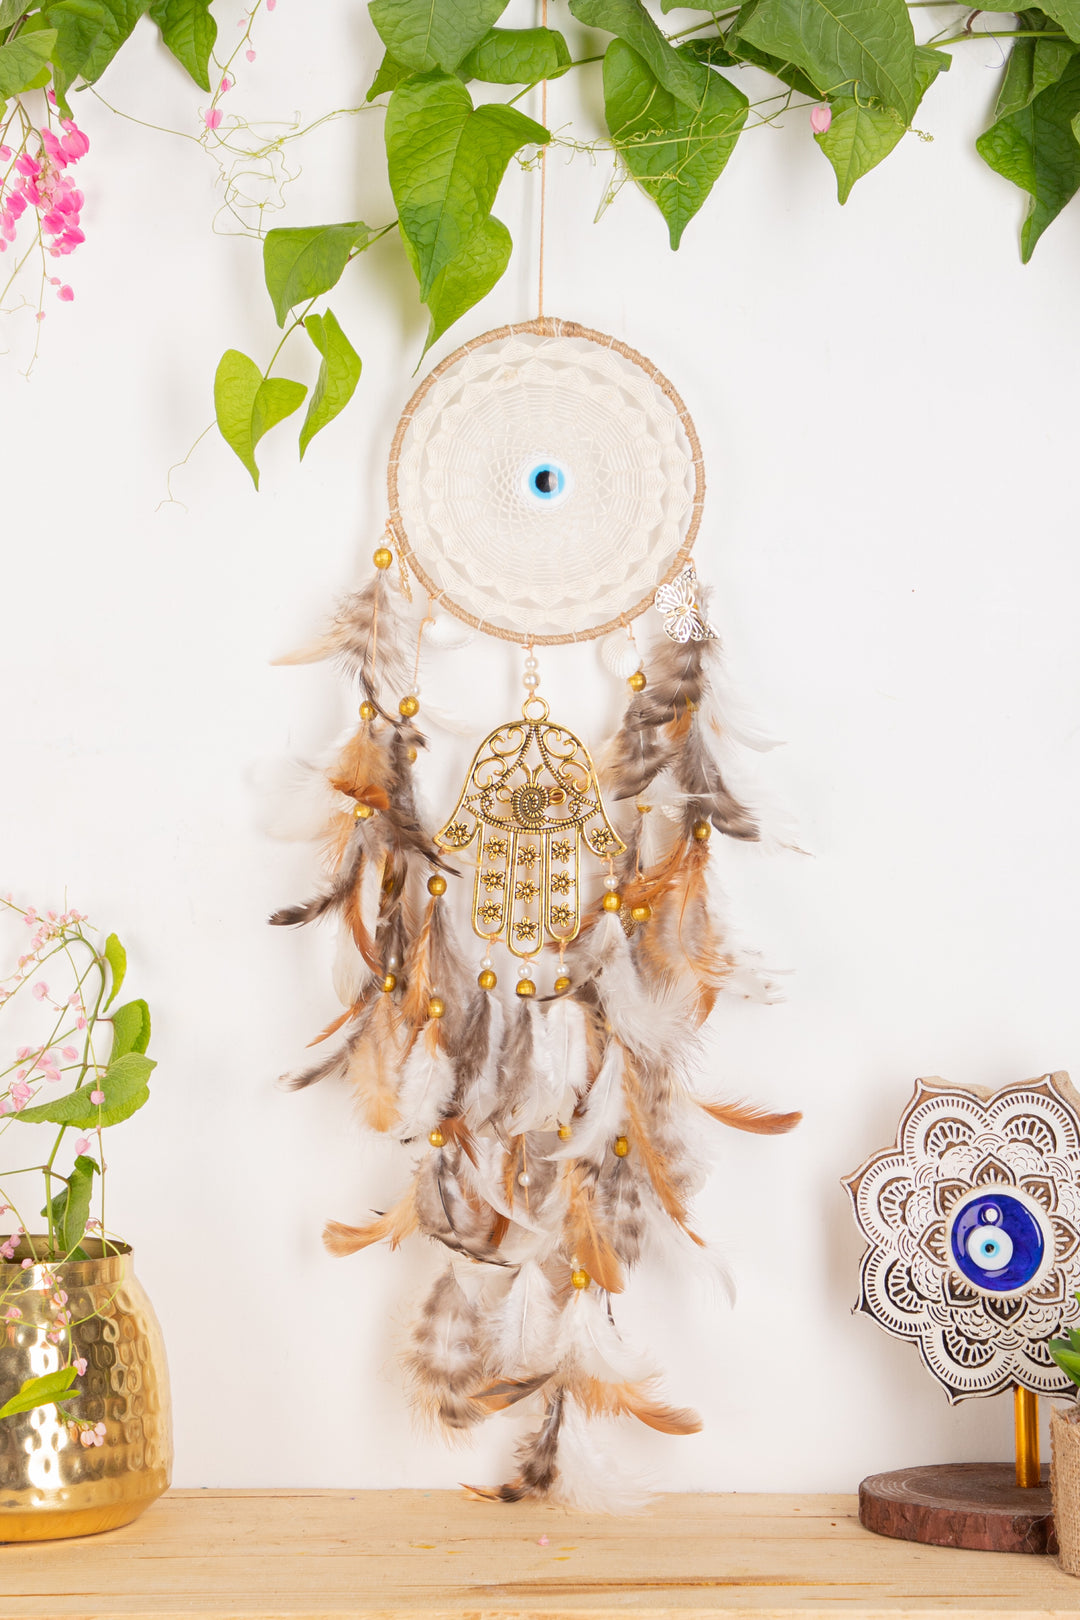 Buy Handcrafted Dream Catchers online – Soul Works –